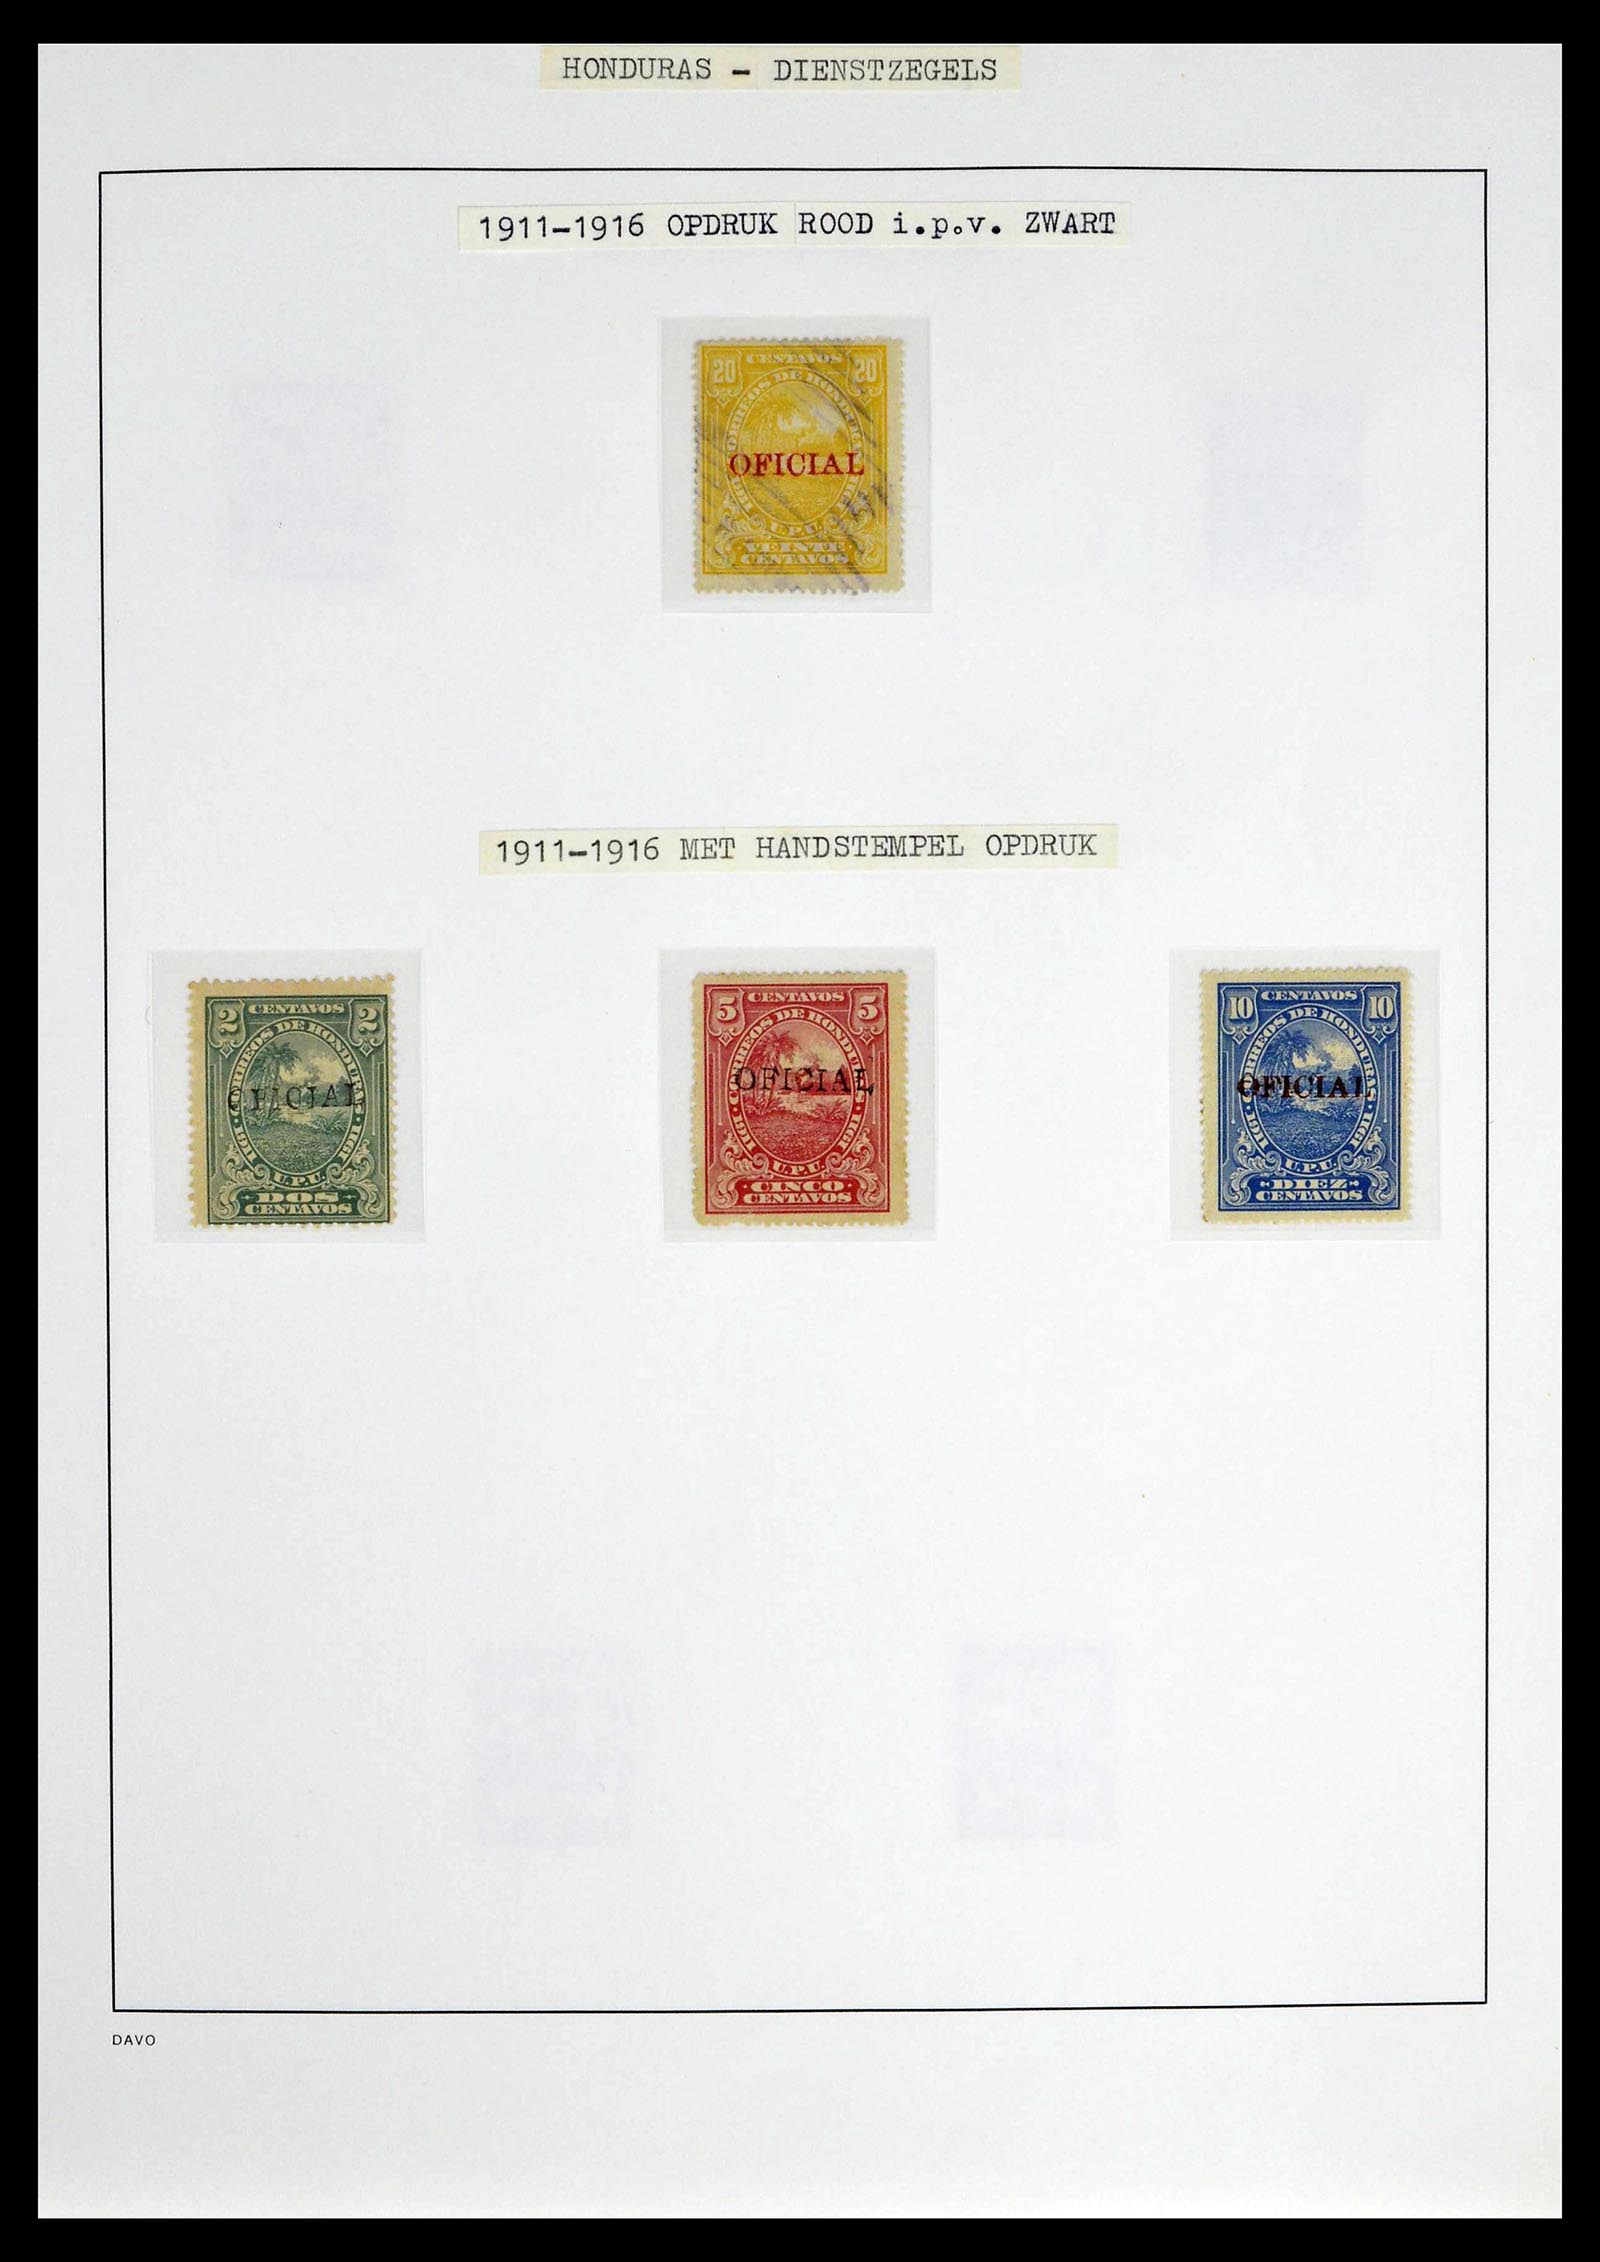 39404 0009 - Stamp collection 39404 Honduras service stamps 1890-1974.